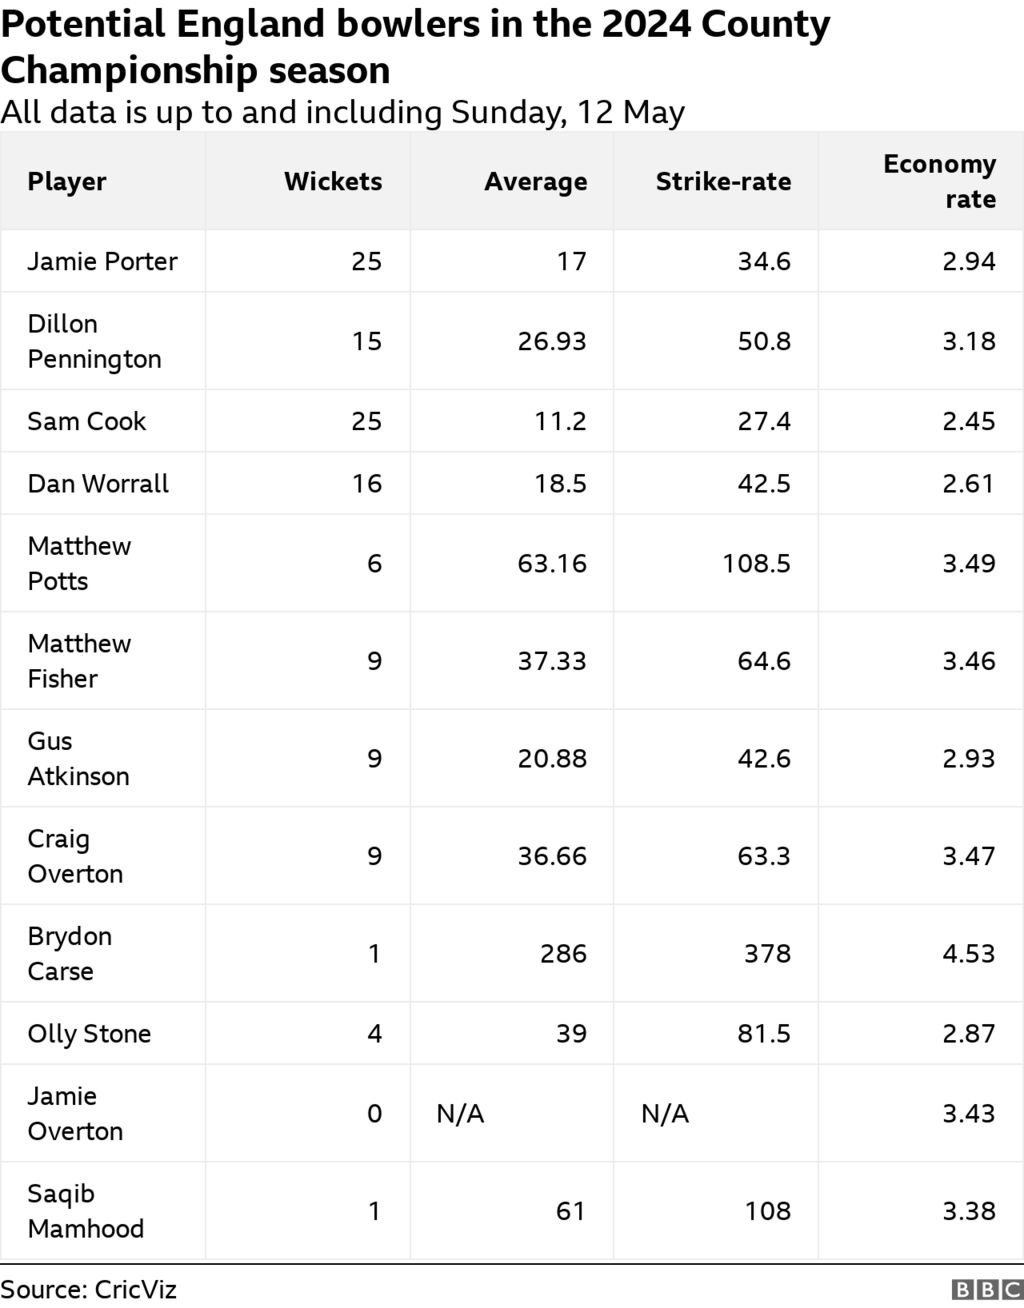 Potential England bowlers in the 2024 County Championship: Wickets: Porter 25, Pennington 15, Cook 25, Worrall 16, Potts 6, Fisher 9, Atkinson 9, C Overton 9, Carse 1, Stone 4, J Overton 0, Mahmood 1. Average: Porter 17, Pennington 26.93, Cook 11.2, Worrall 18.5, Potts 63.16, Fisher 37.33, Atkinson 20.88, Overton 36.66, Carse 286, Stone 39, Mahmood 61. Strike-rate: Porter 34.6, Pennington 50.8, Cook 27.4, Worrall 42.5, Potts 108.5, Fisher 64.6, Atkinson 42.6, C Overton 63.3, Carse 378, Stone 81.5, J Overton N/A and Mahmood 108